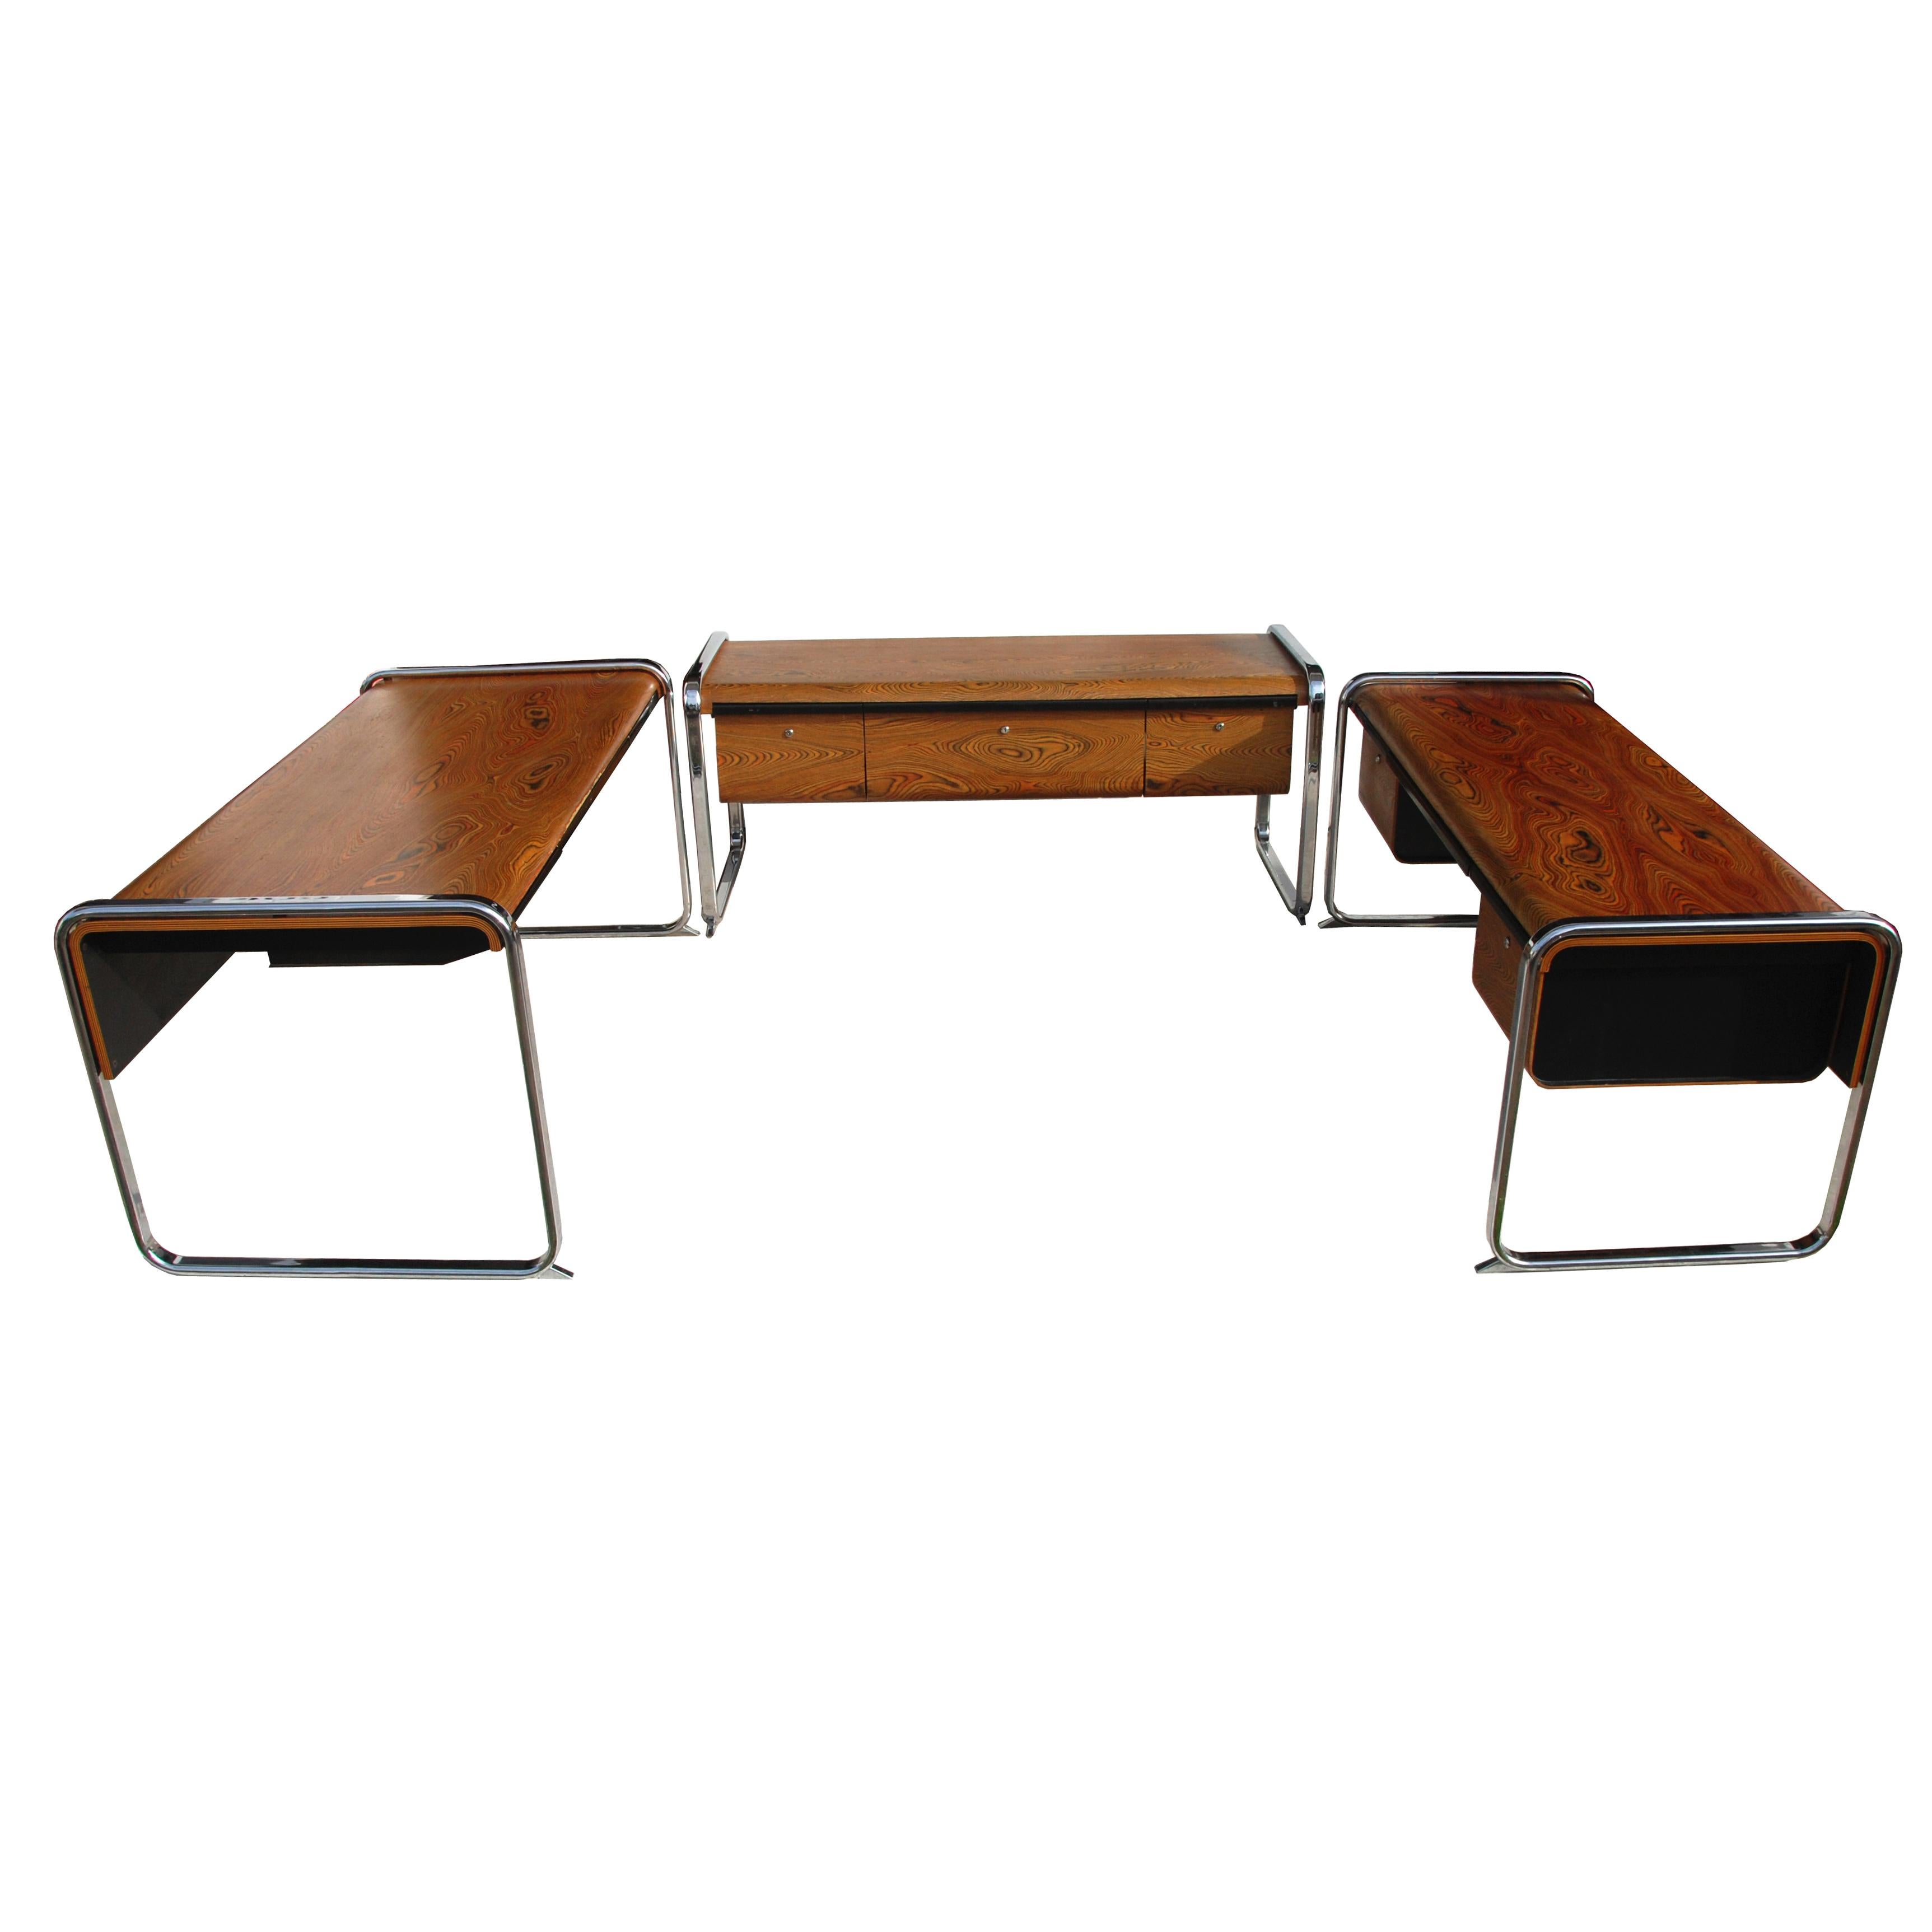 Peter Protzmann Zebrawood and Chrome Credenza for Herman Miller For Sale 1